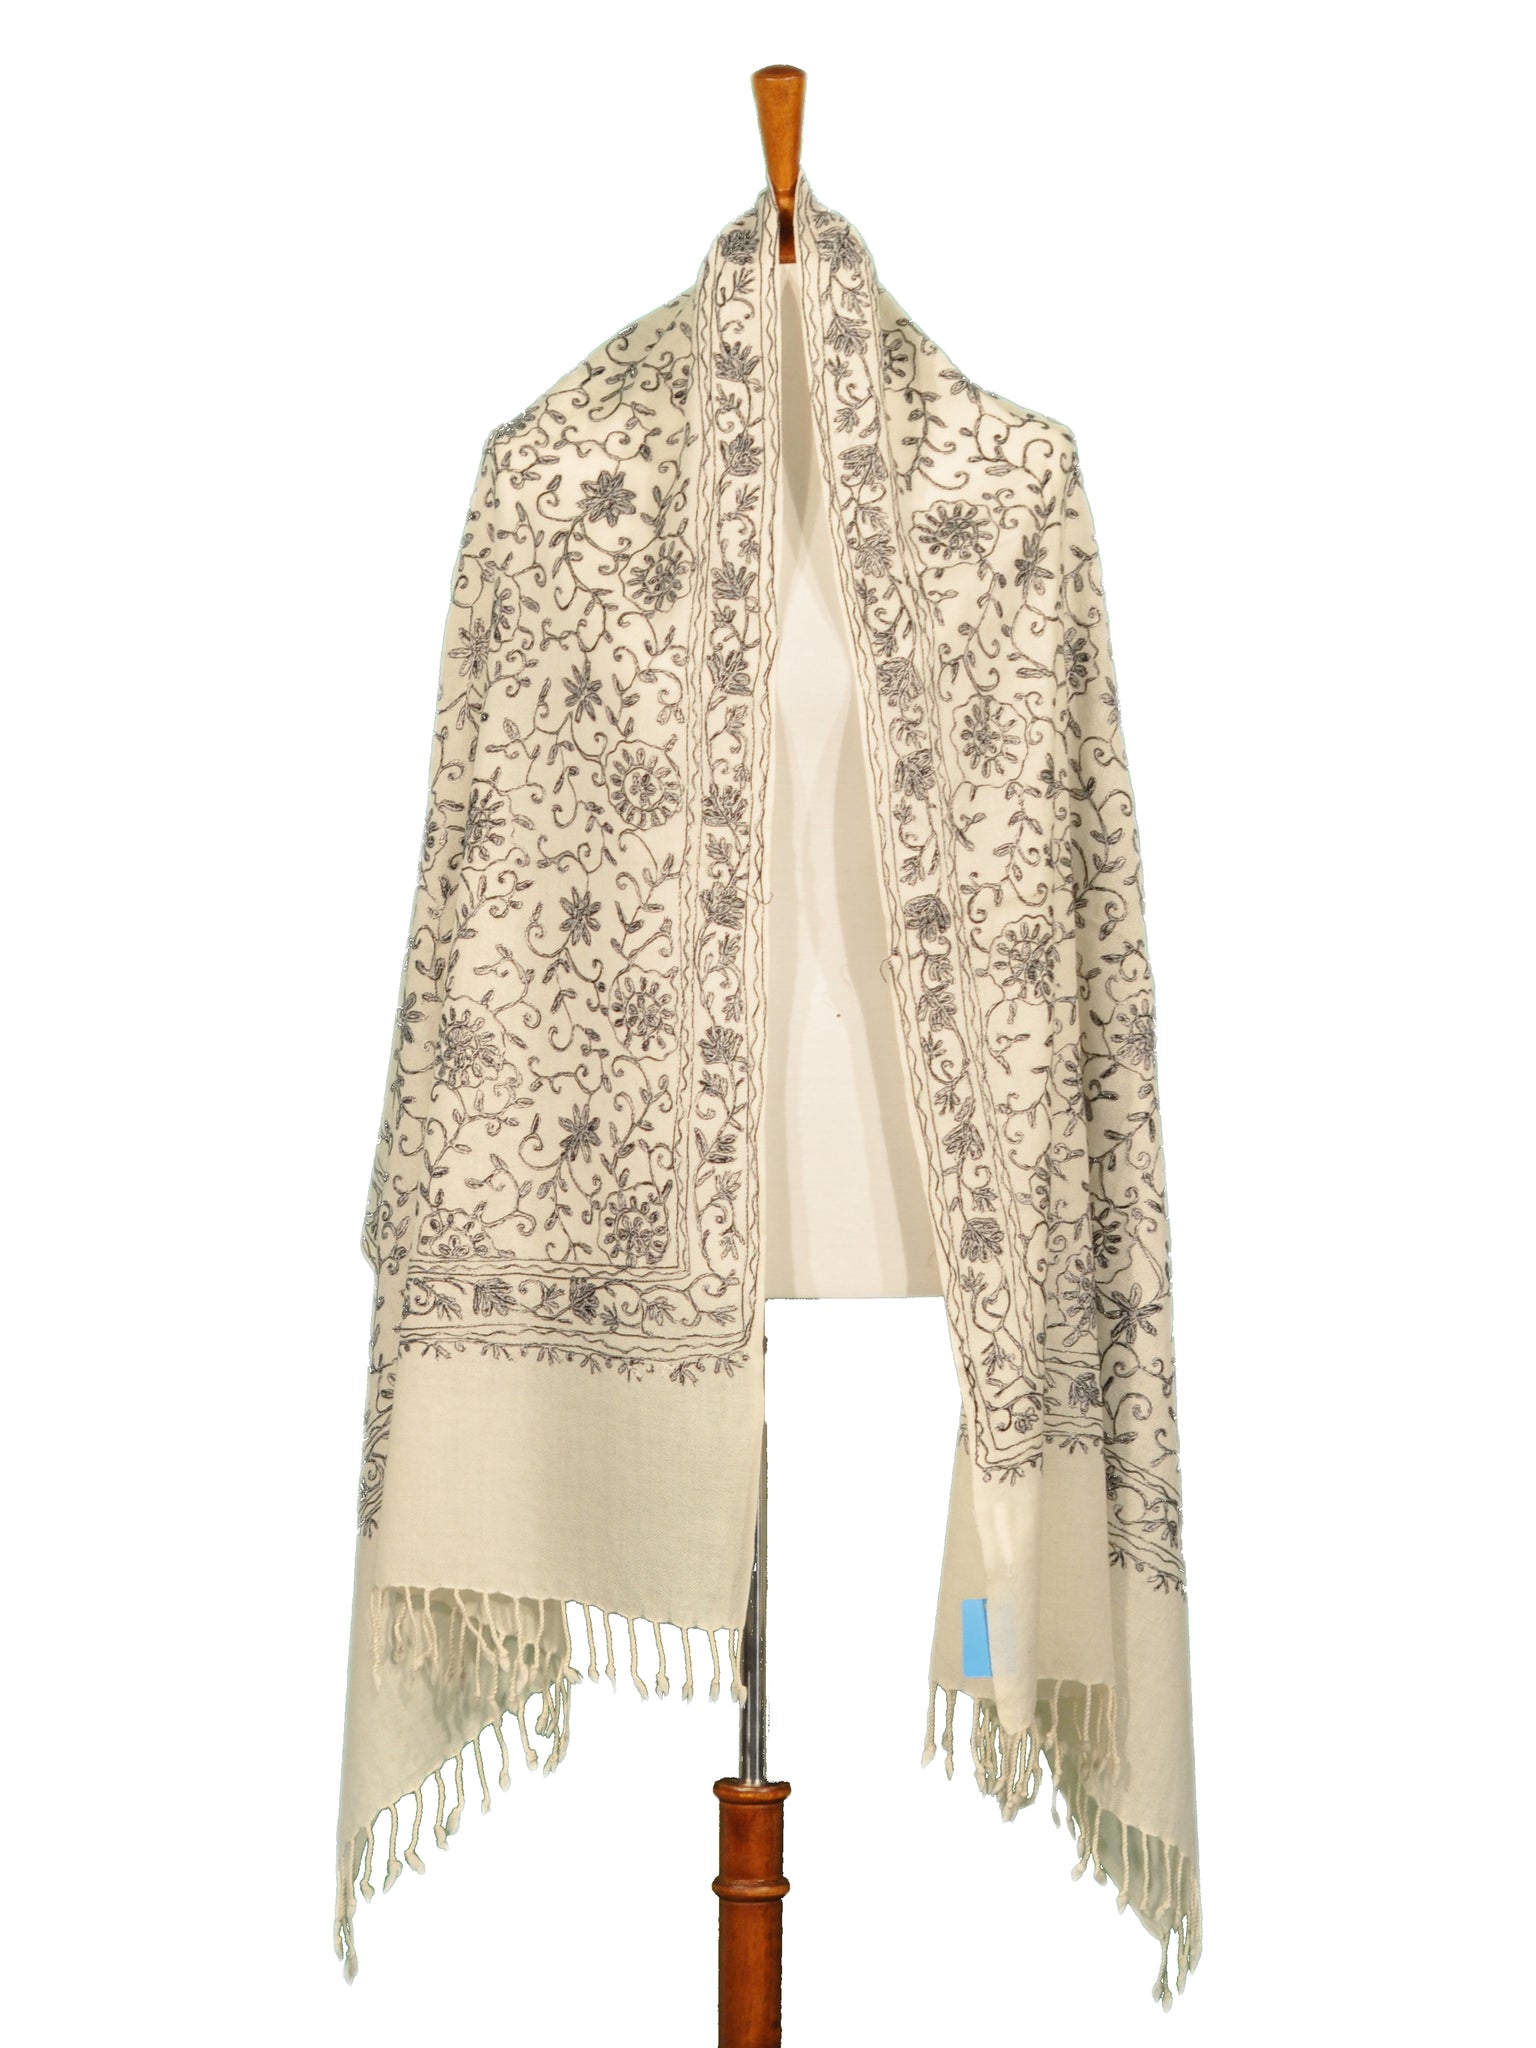 Off White with Tan Floral Embroidered Shawl